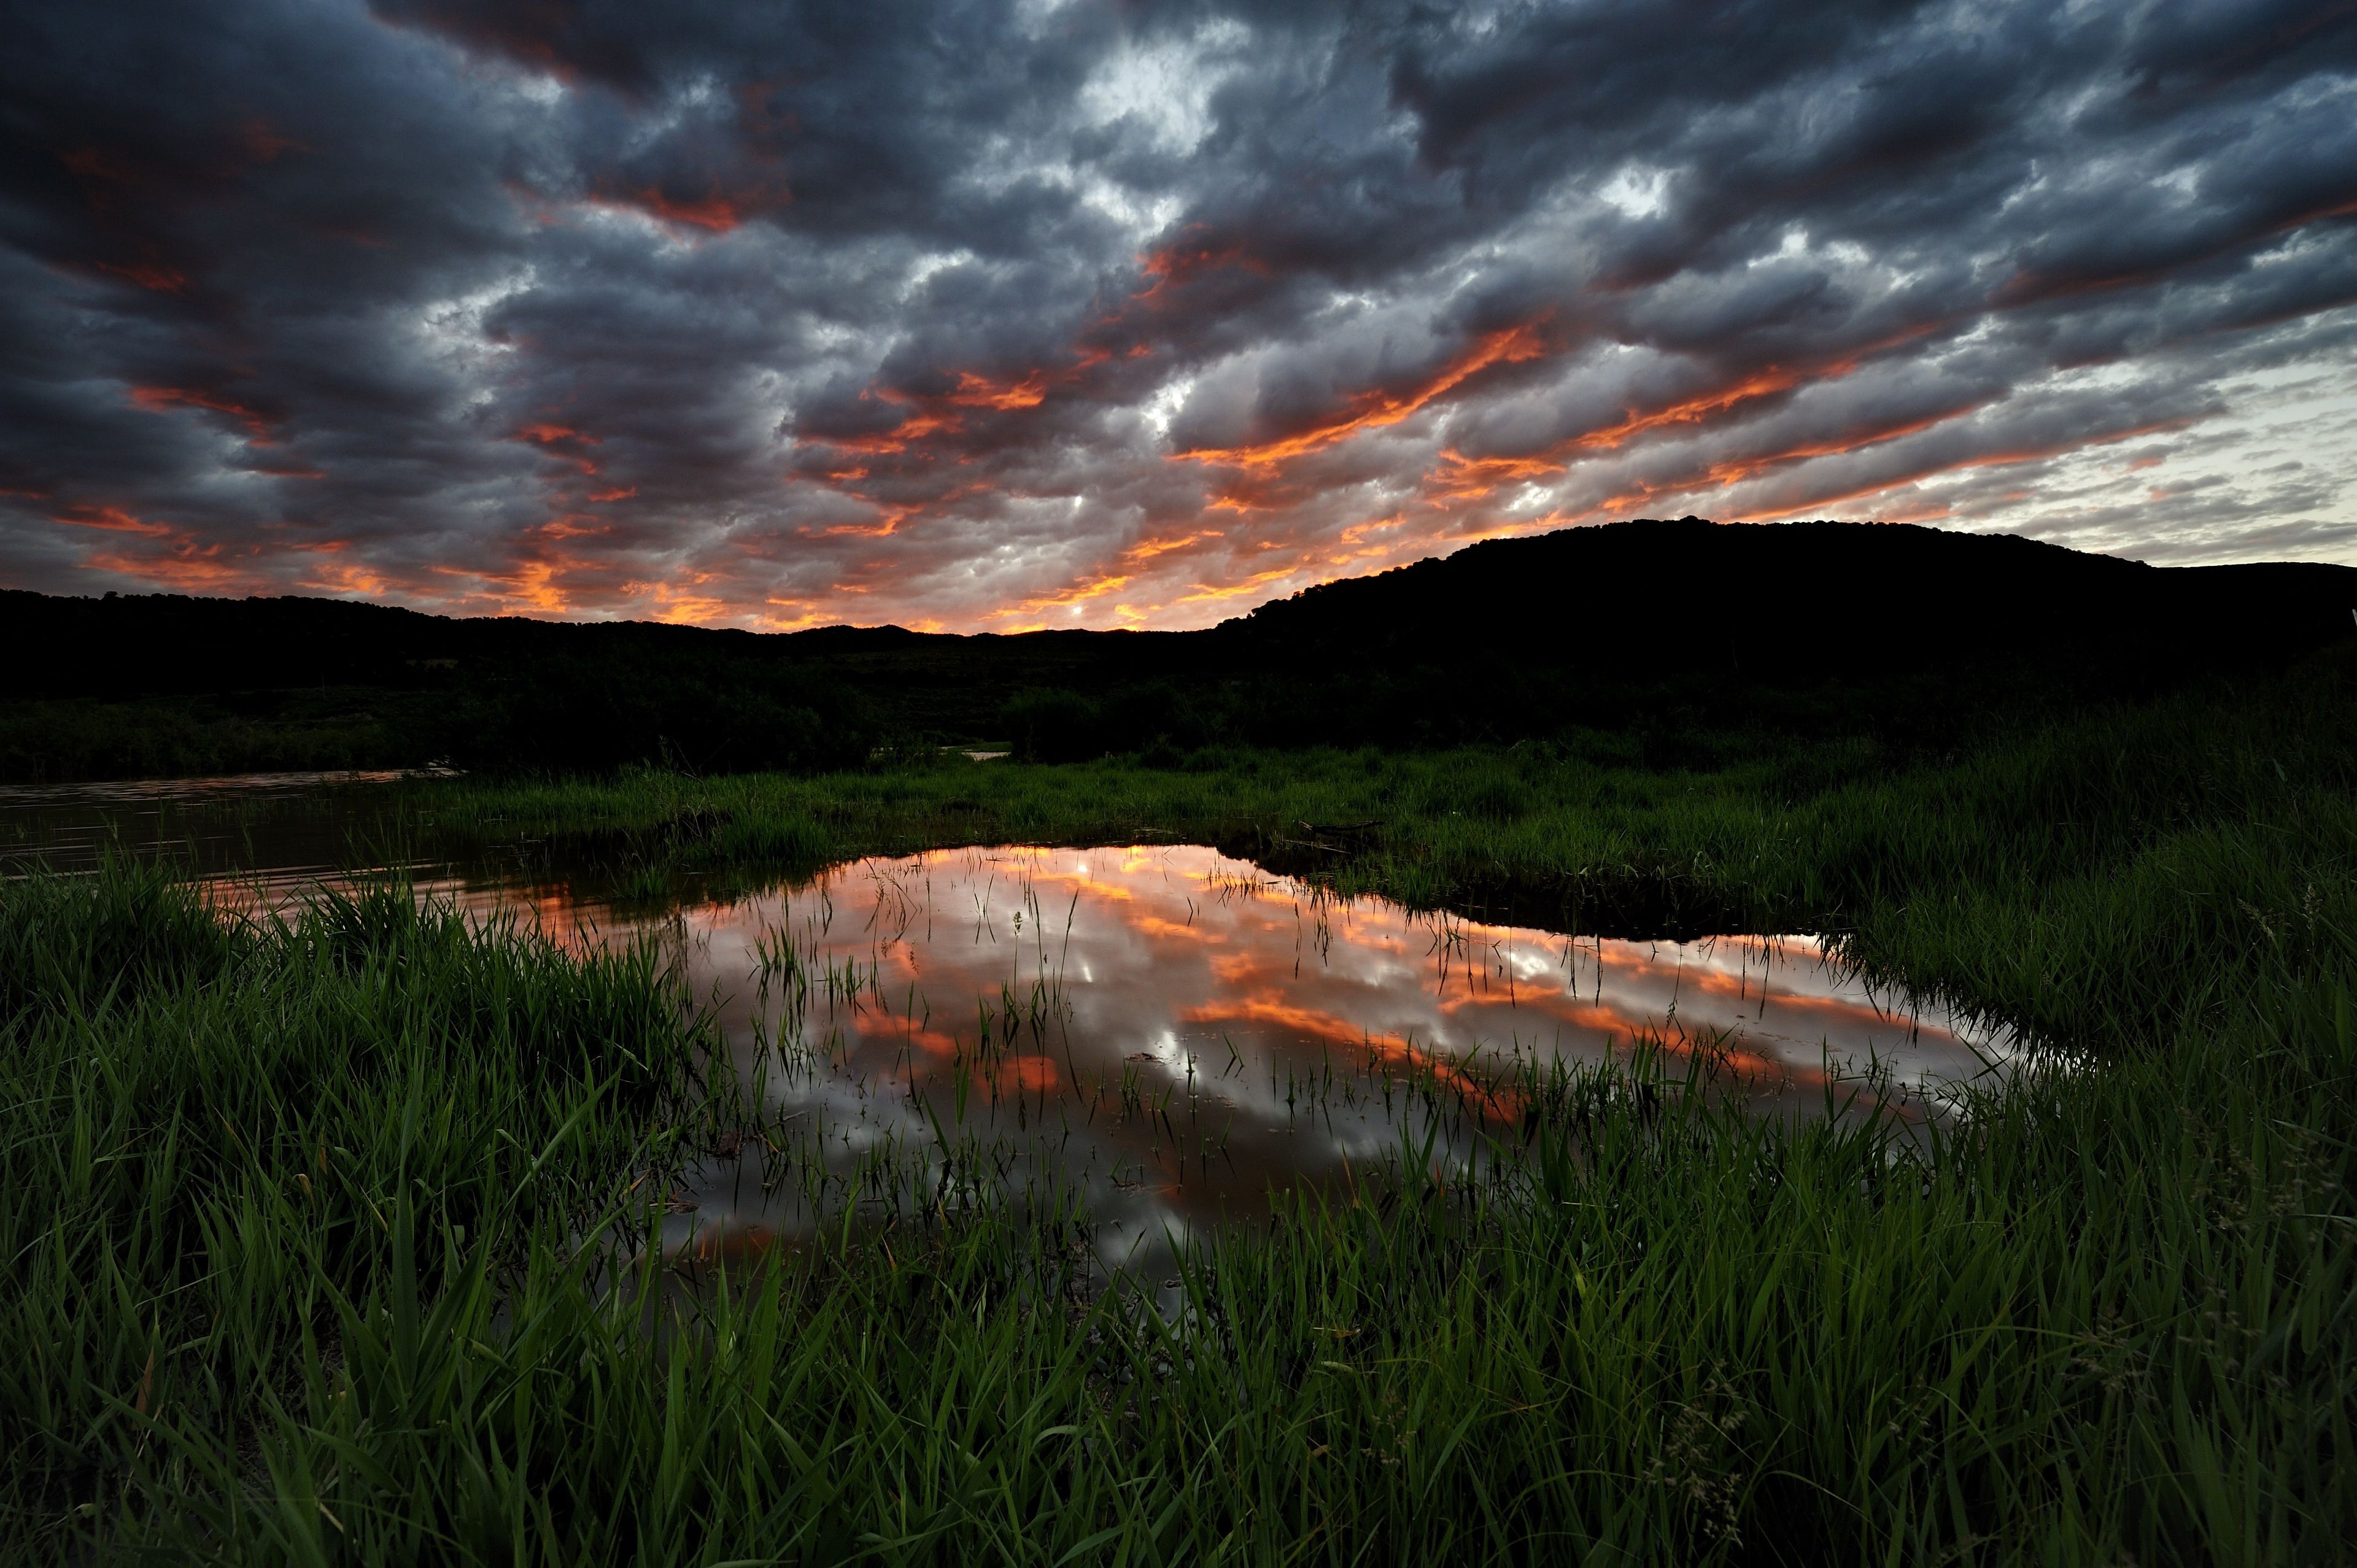 The sun rises over mountains and a pond in Utah.